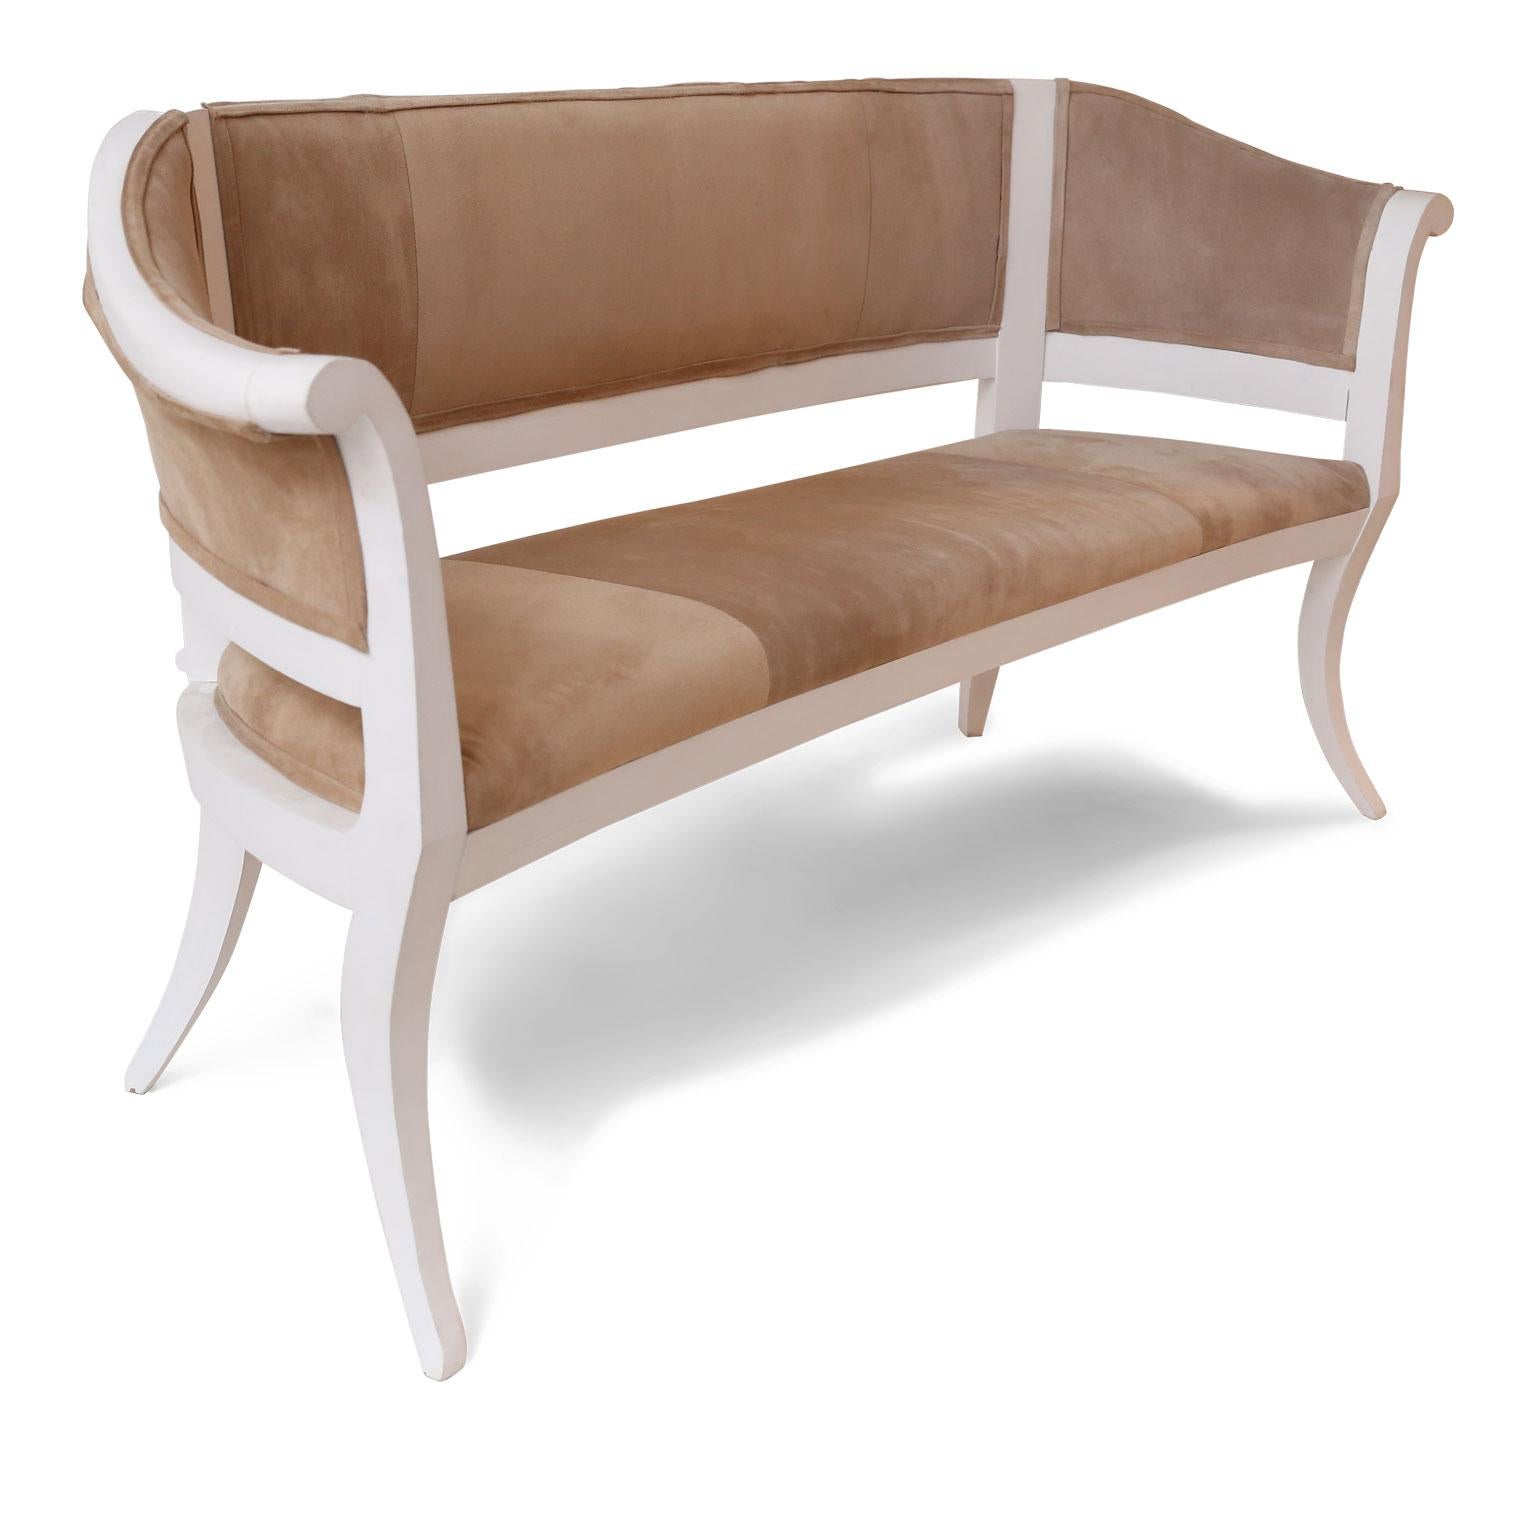 Custom suede upholstered settees – a one-of-a-kind pair. Painted frames newly-carved in a neoclassical style and painted in white. Back in linen. (Seat measures 20.25 inches high by 65 inches wide by 19 inches deep. Arms are about 32.75 inches high